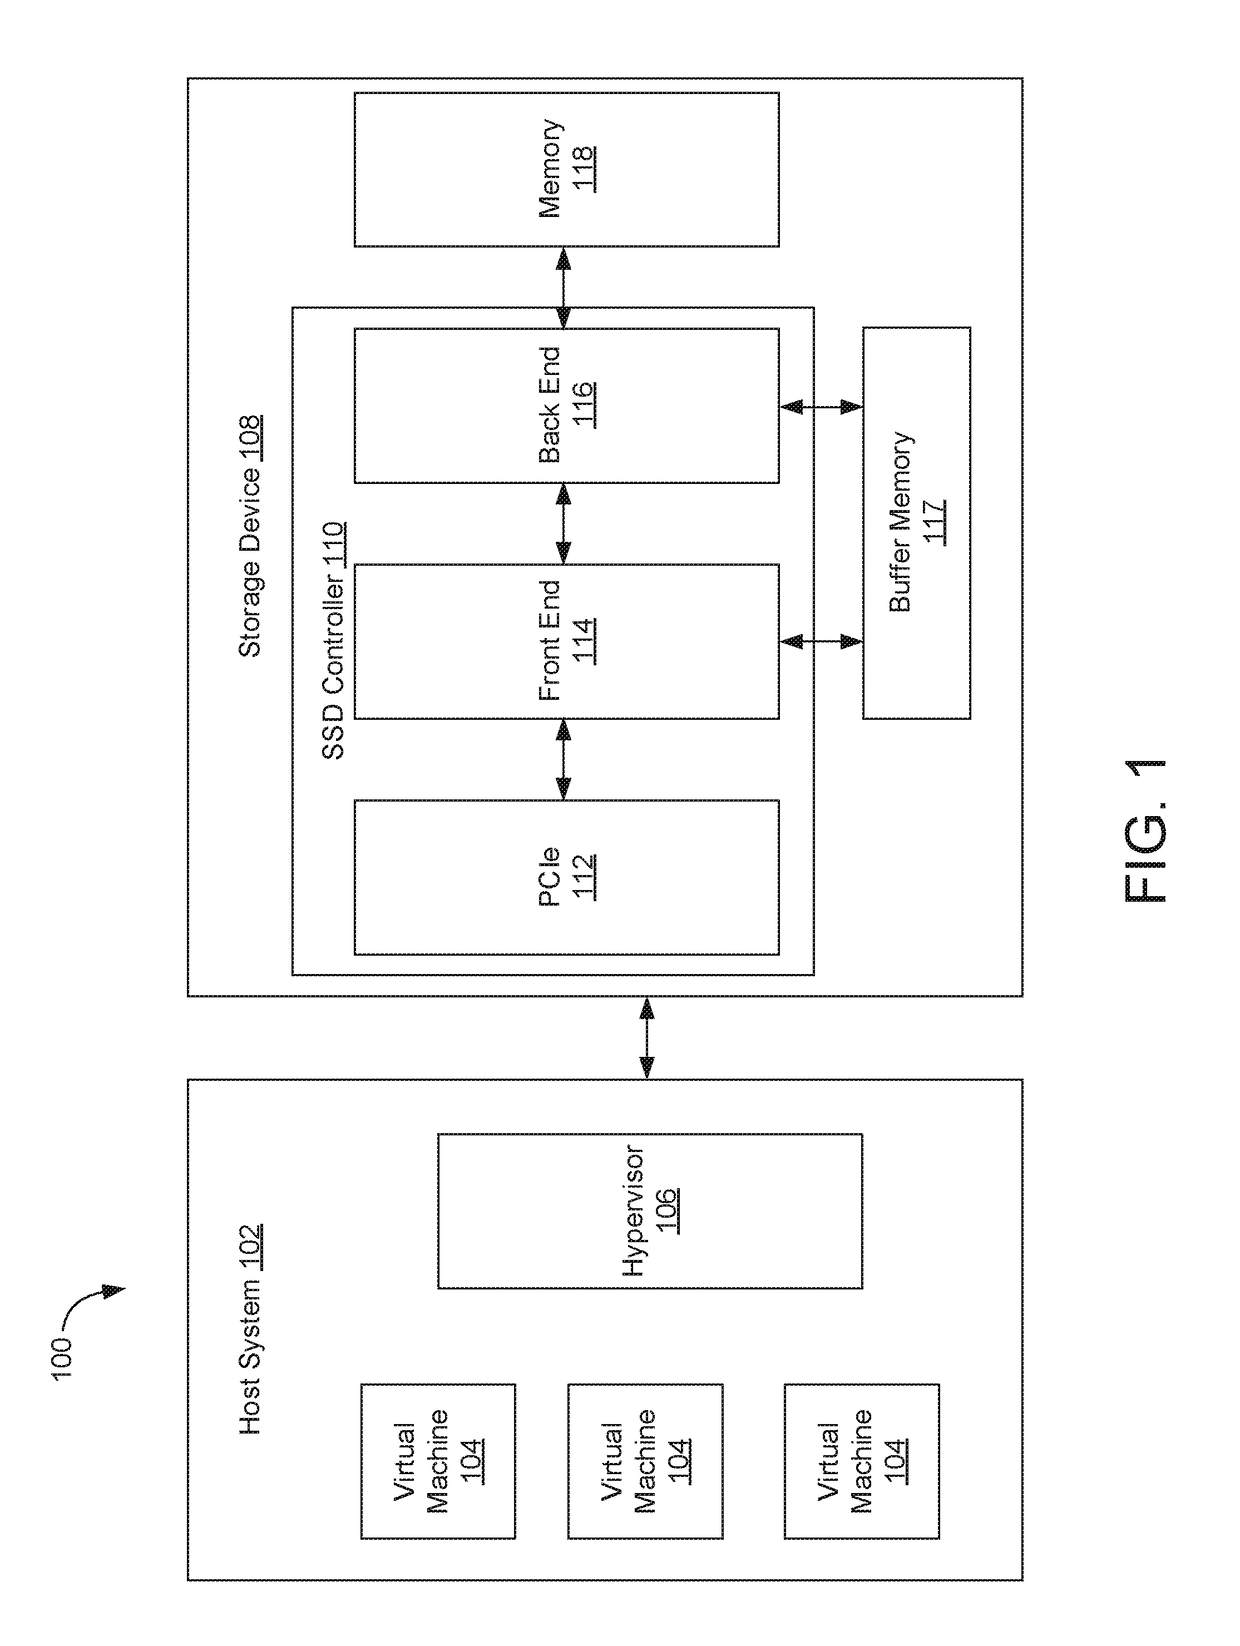 Managing function level reset in an io virtualization-enabled storage device